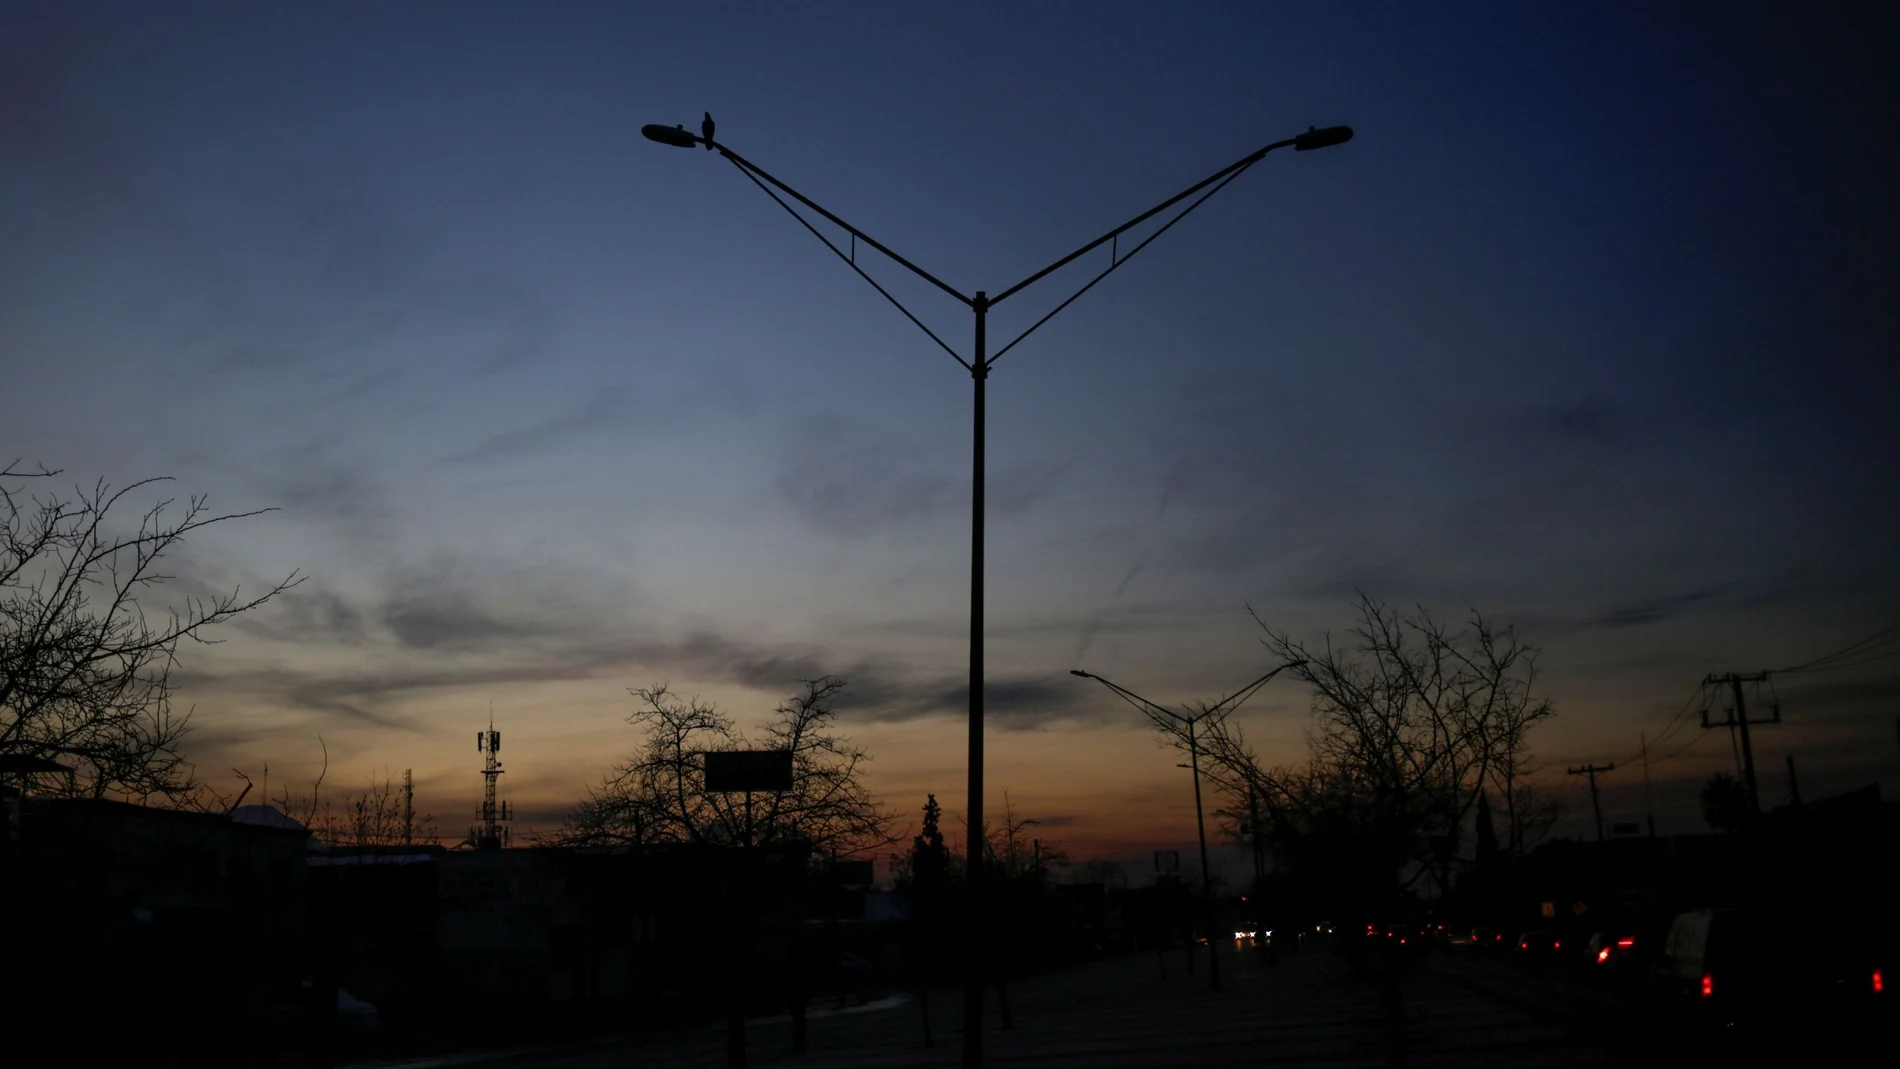 Light poles are pictured without power during an outage in Mexico's electricity network, in Ciudad Juarez, Mexico February 15, 2021. REUTERS/Jose Luis Gonzalez